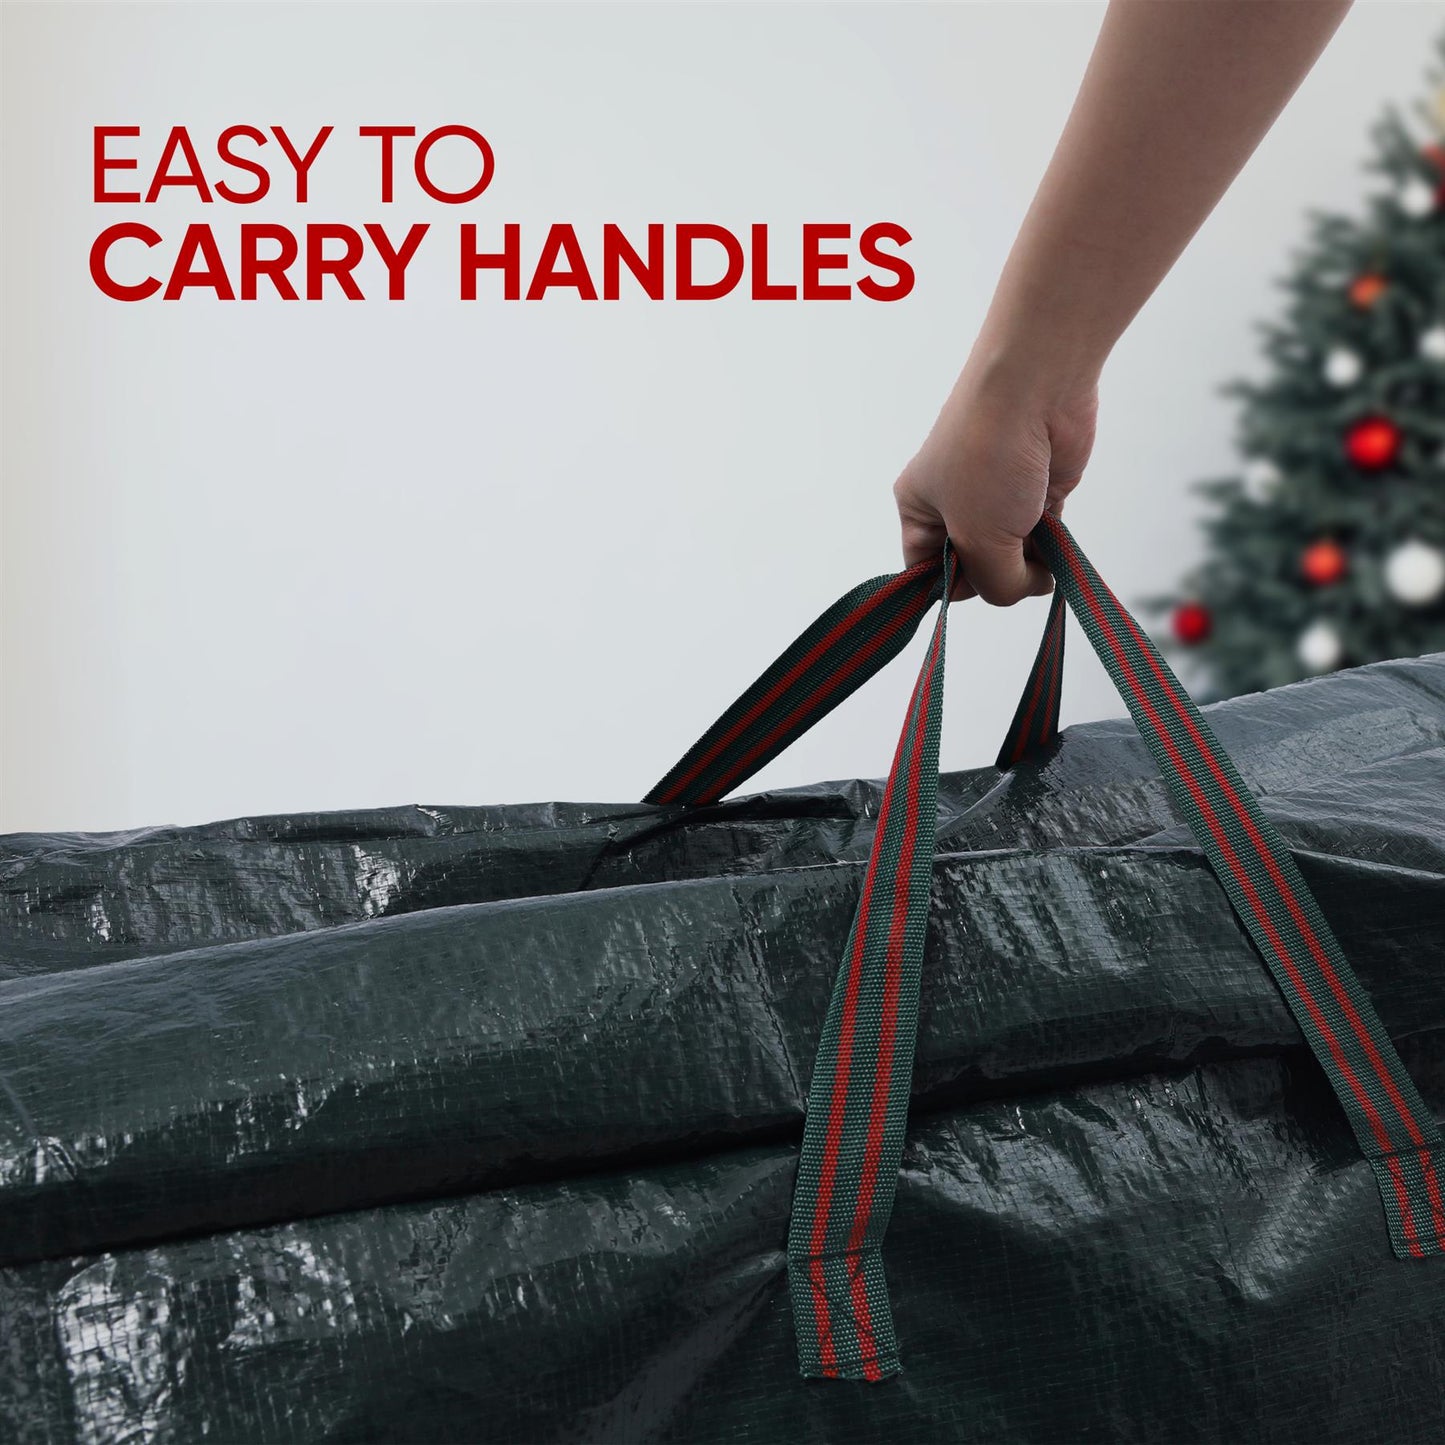 Christmas Tree And Decoration Storage Bag With Convenient Handles